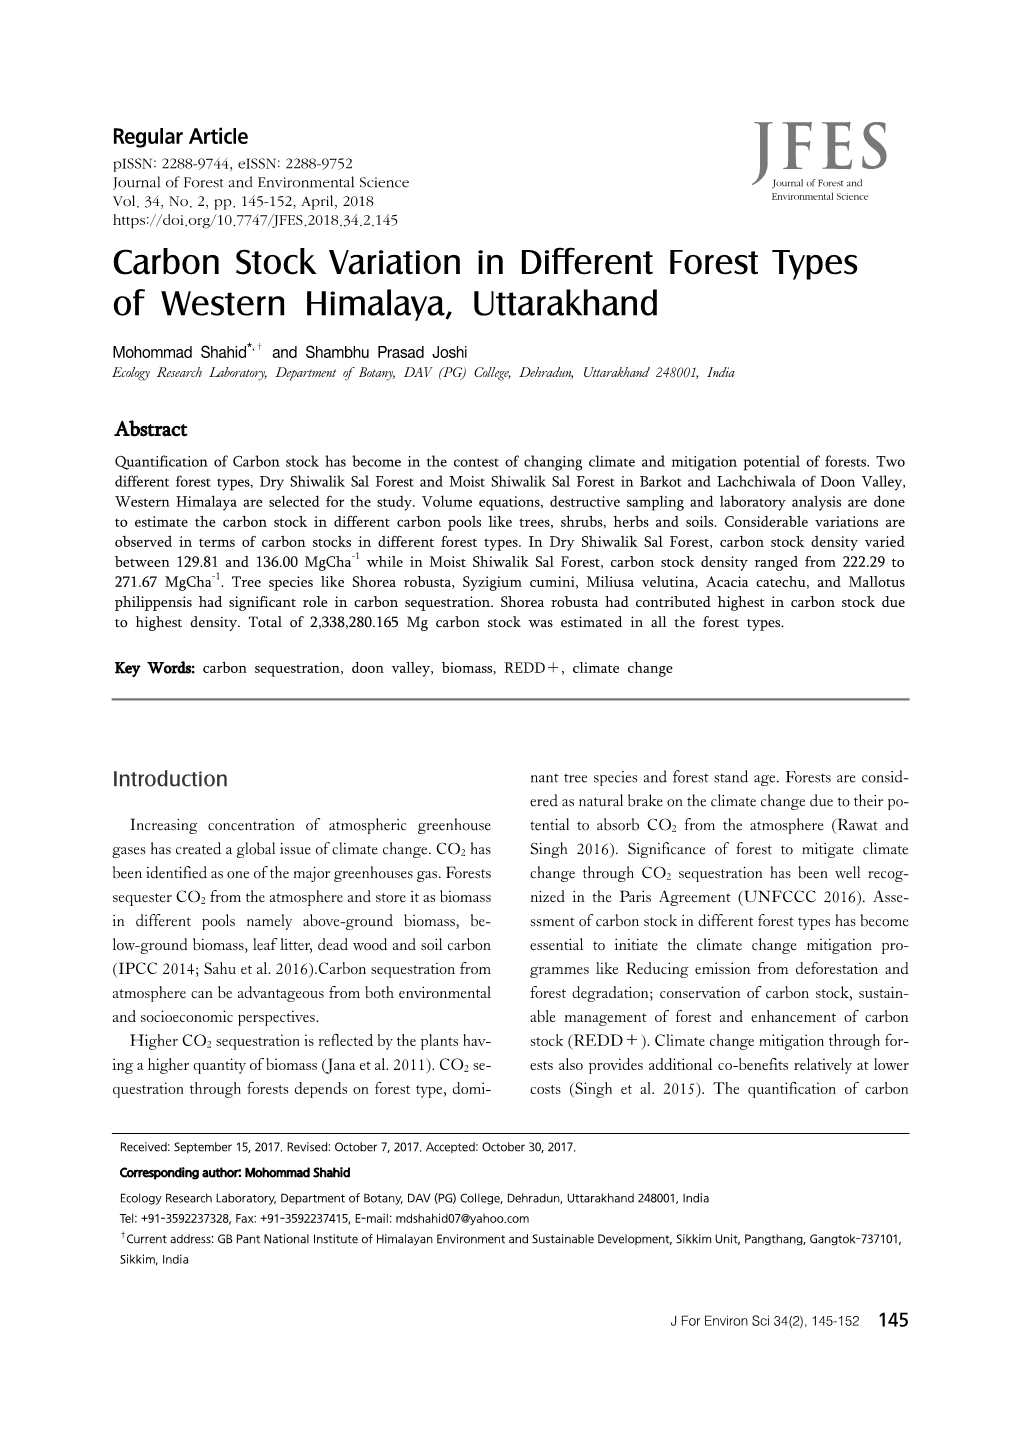 Carbon Stock Variation in Different Forest Types of Western Himalaya, Uttarakhand